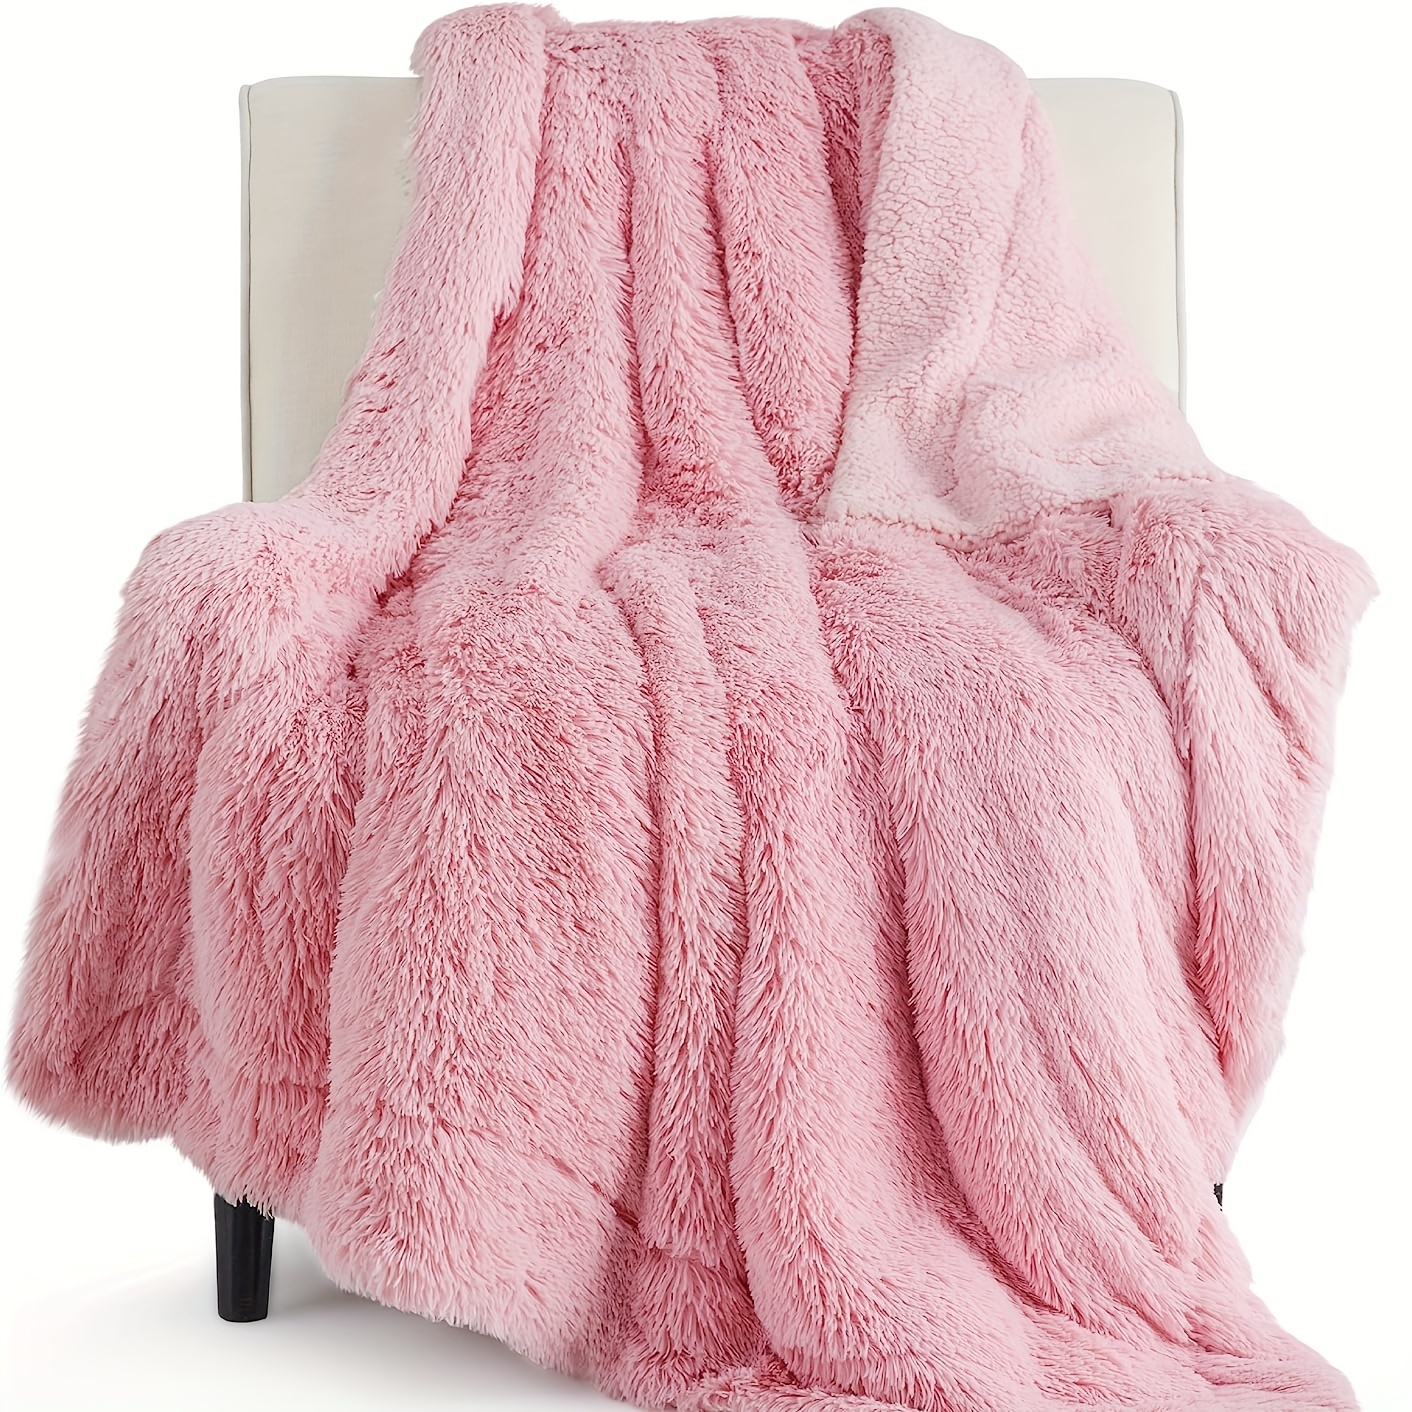 Fleece Throw Blanket For Couch, Fuzzy Soft Cozy Fluffy 3d Jacquard ...